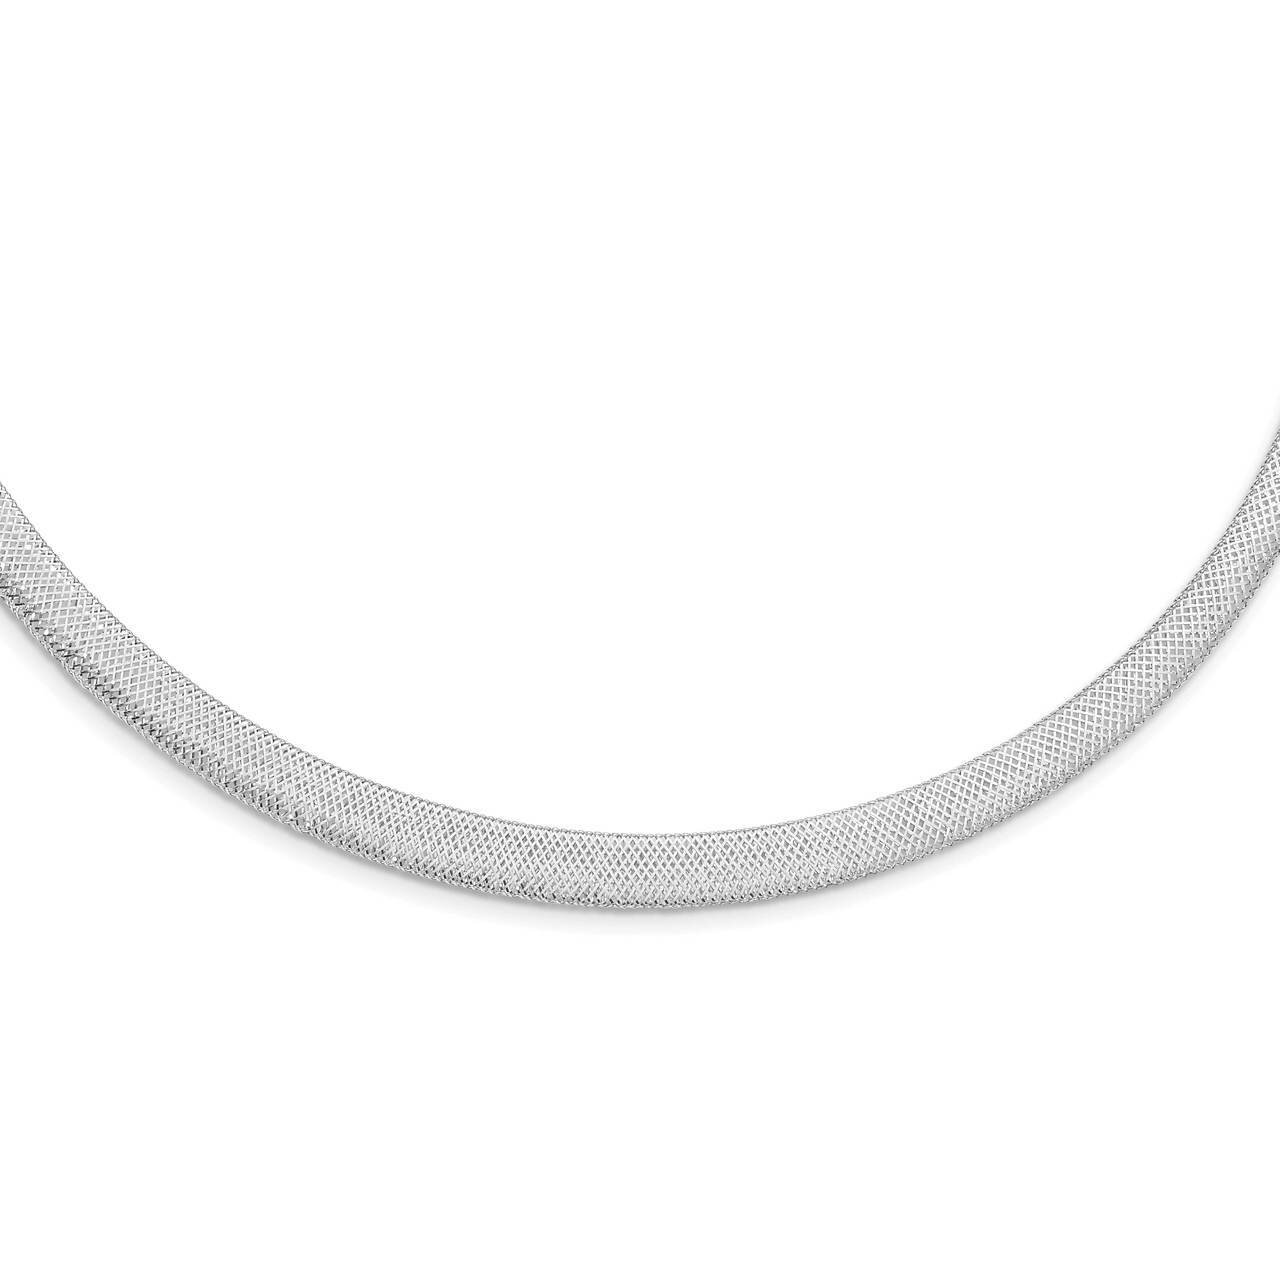 Stretch Mesh with 1.5 Inch Extender Necklace 14k White Gold SF2745W-17